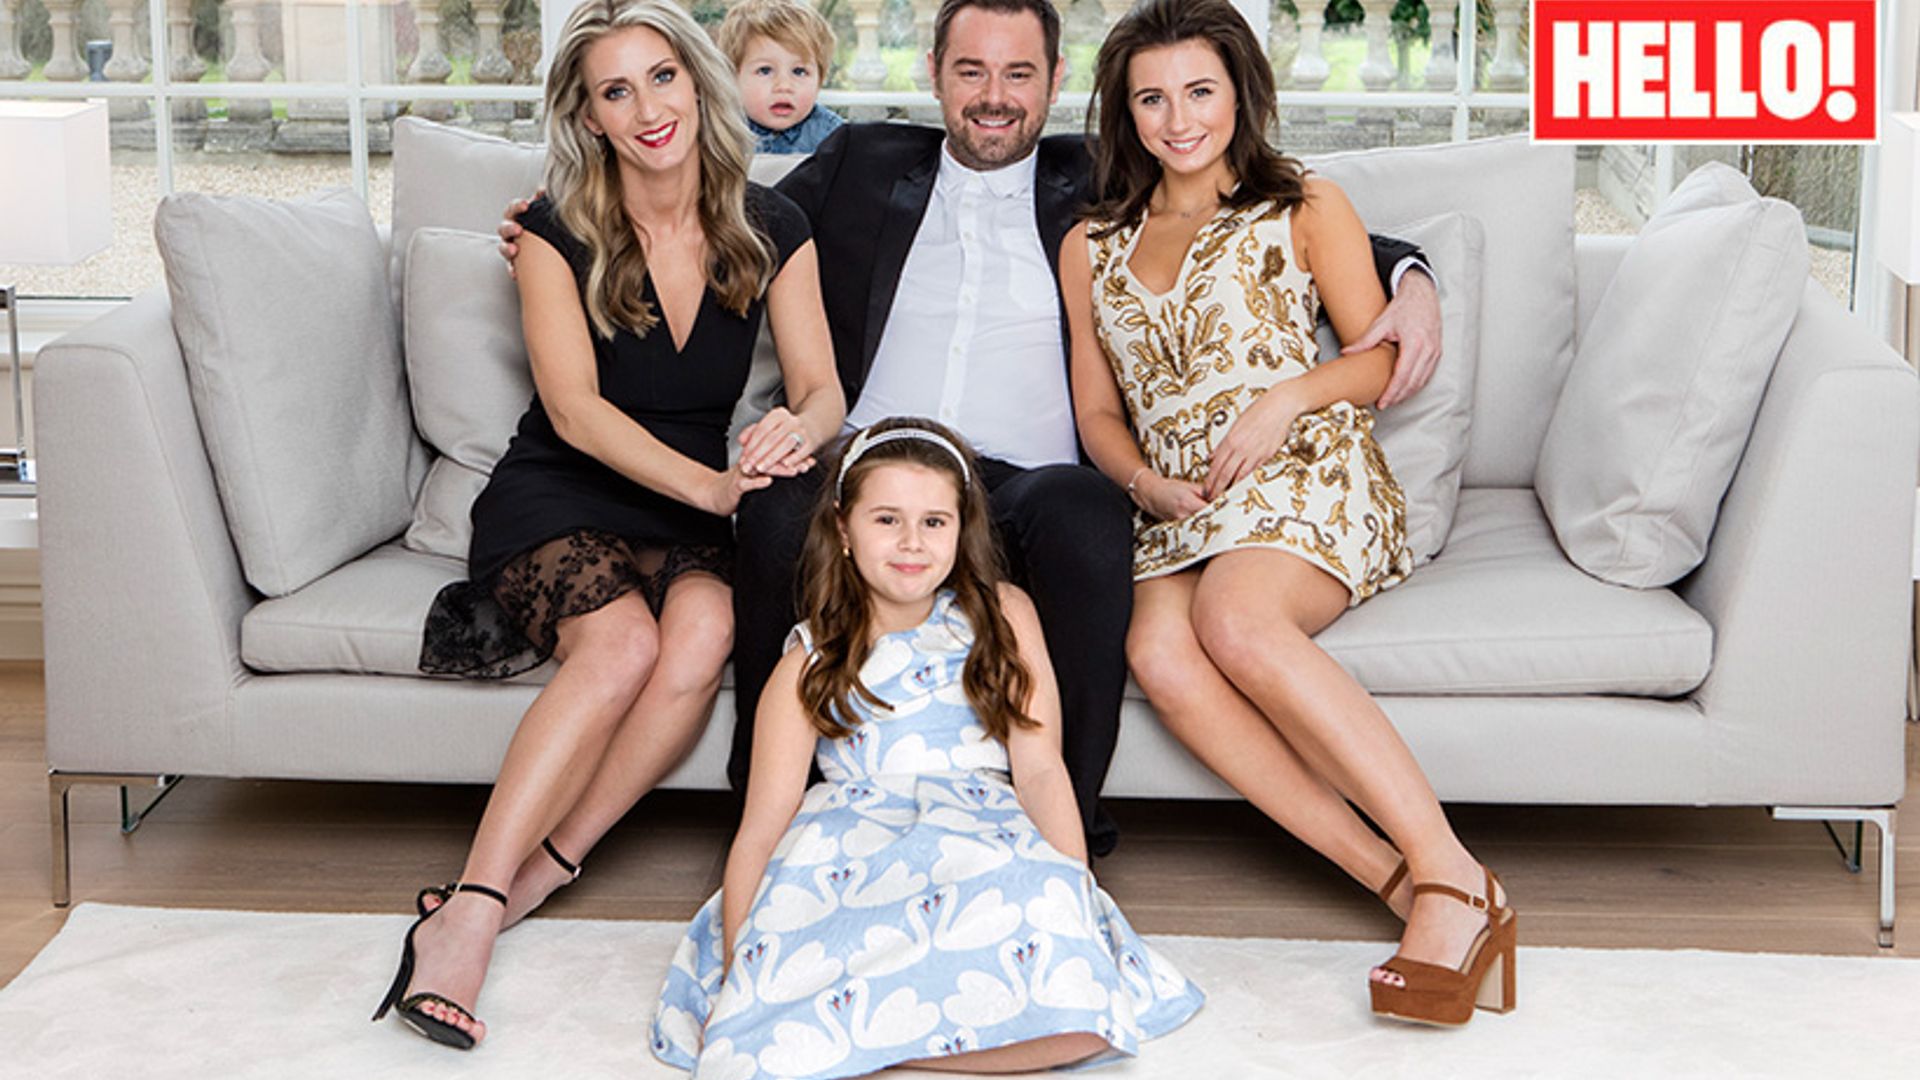 danny dyer and dani dyer